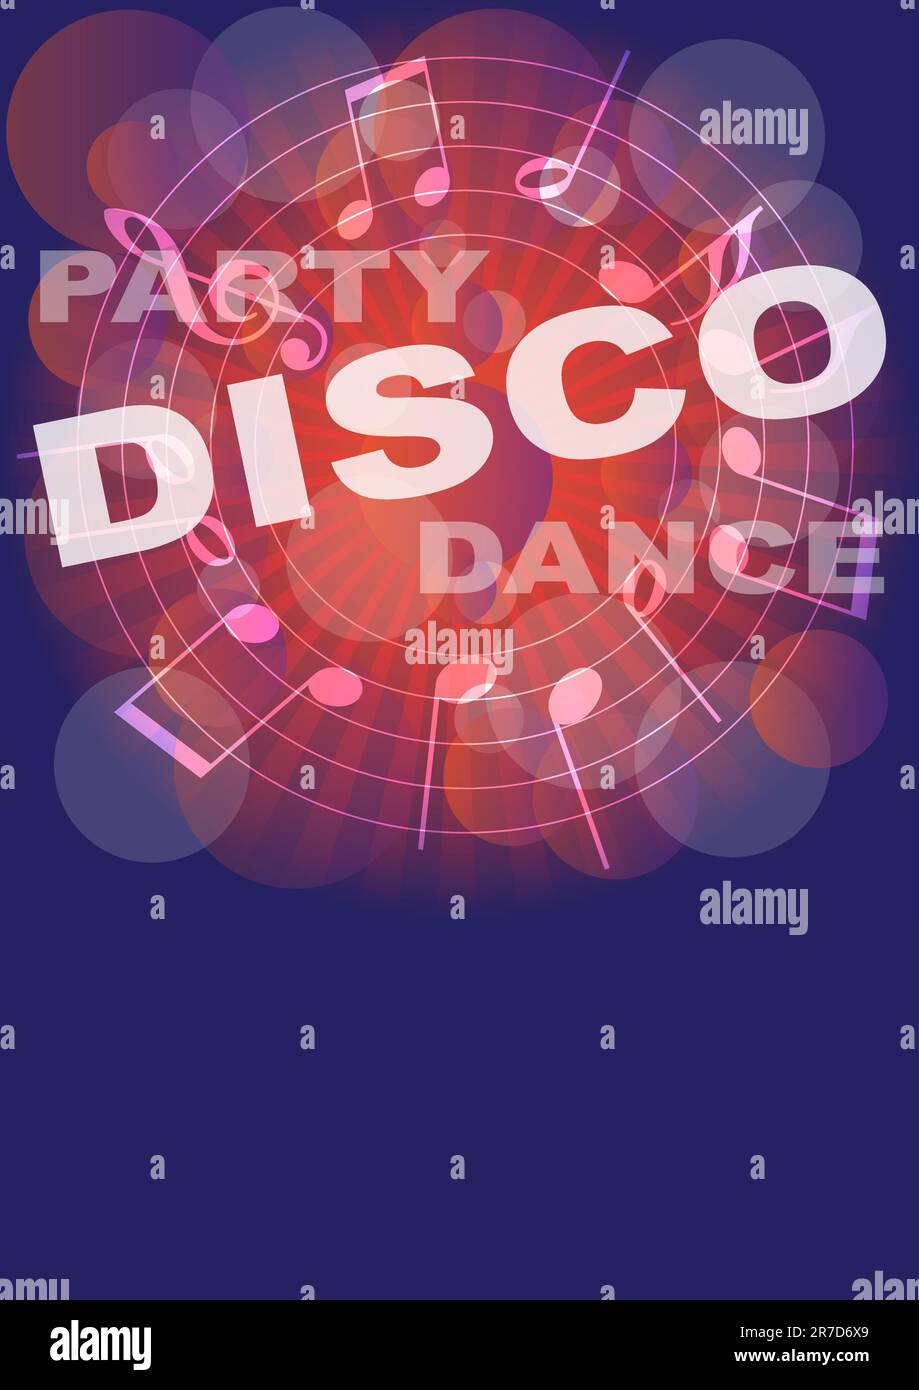 Retro Disco Party Background - Tones and Signs on Dark Blue Background Stock Vector